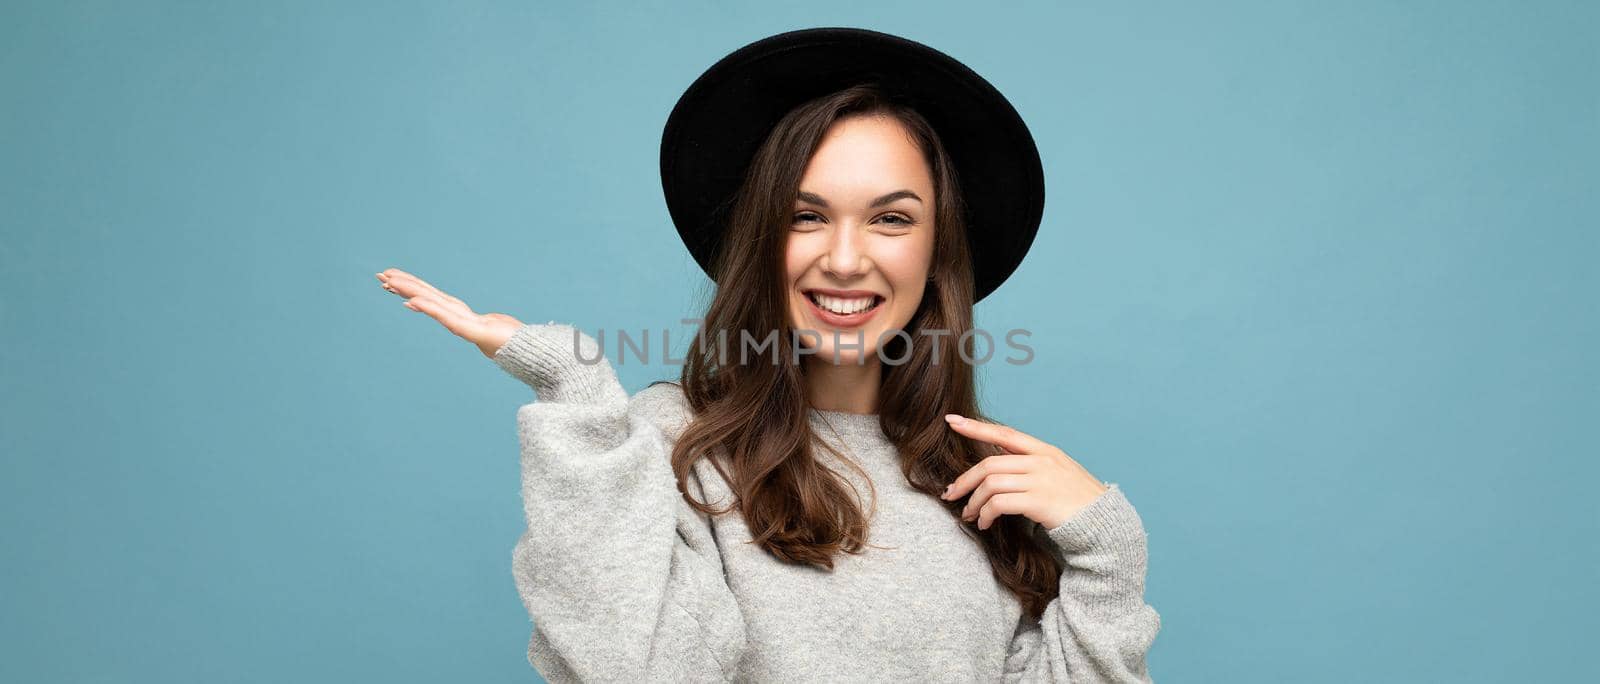 Panoramic photo of attractive brunette happy smiling young woman pointing hand at free space for text wearing grey jersey and black hat isolated on blue background.